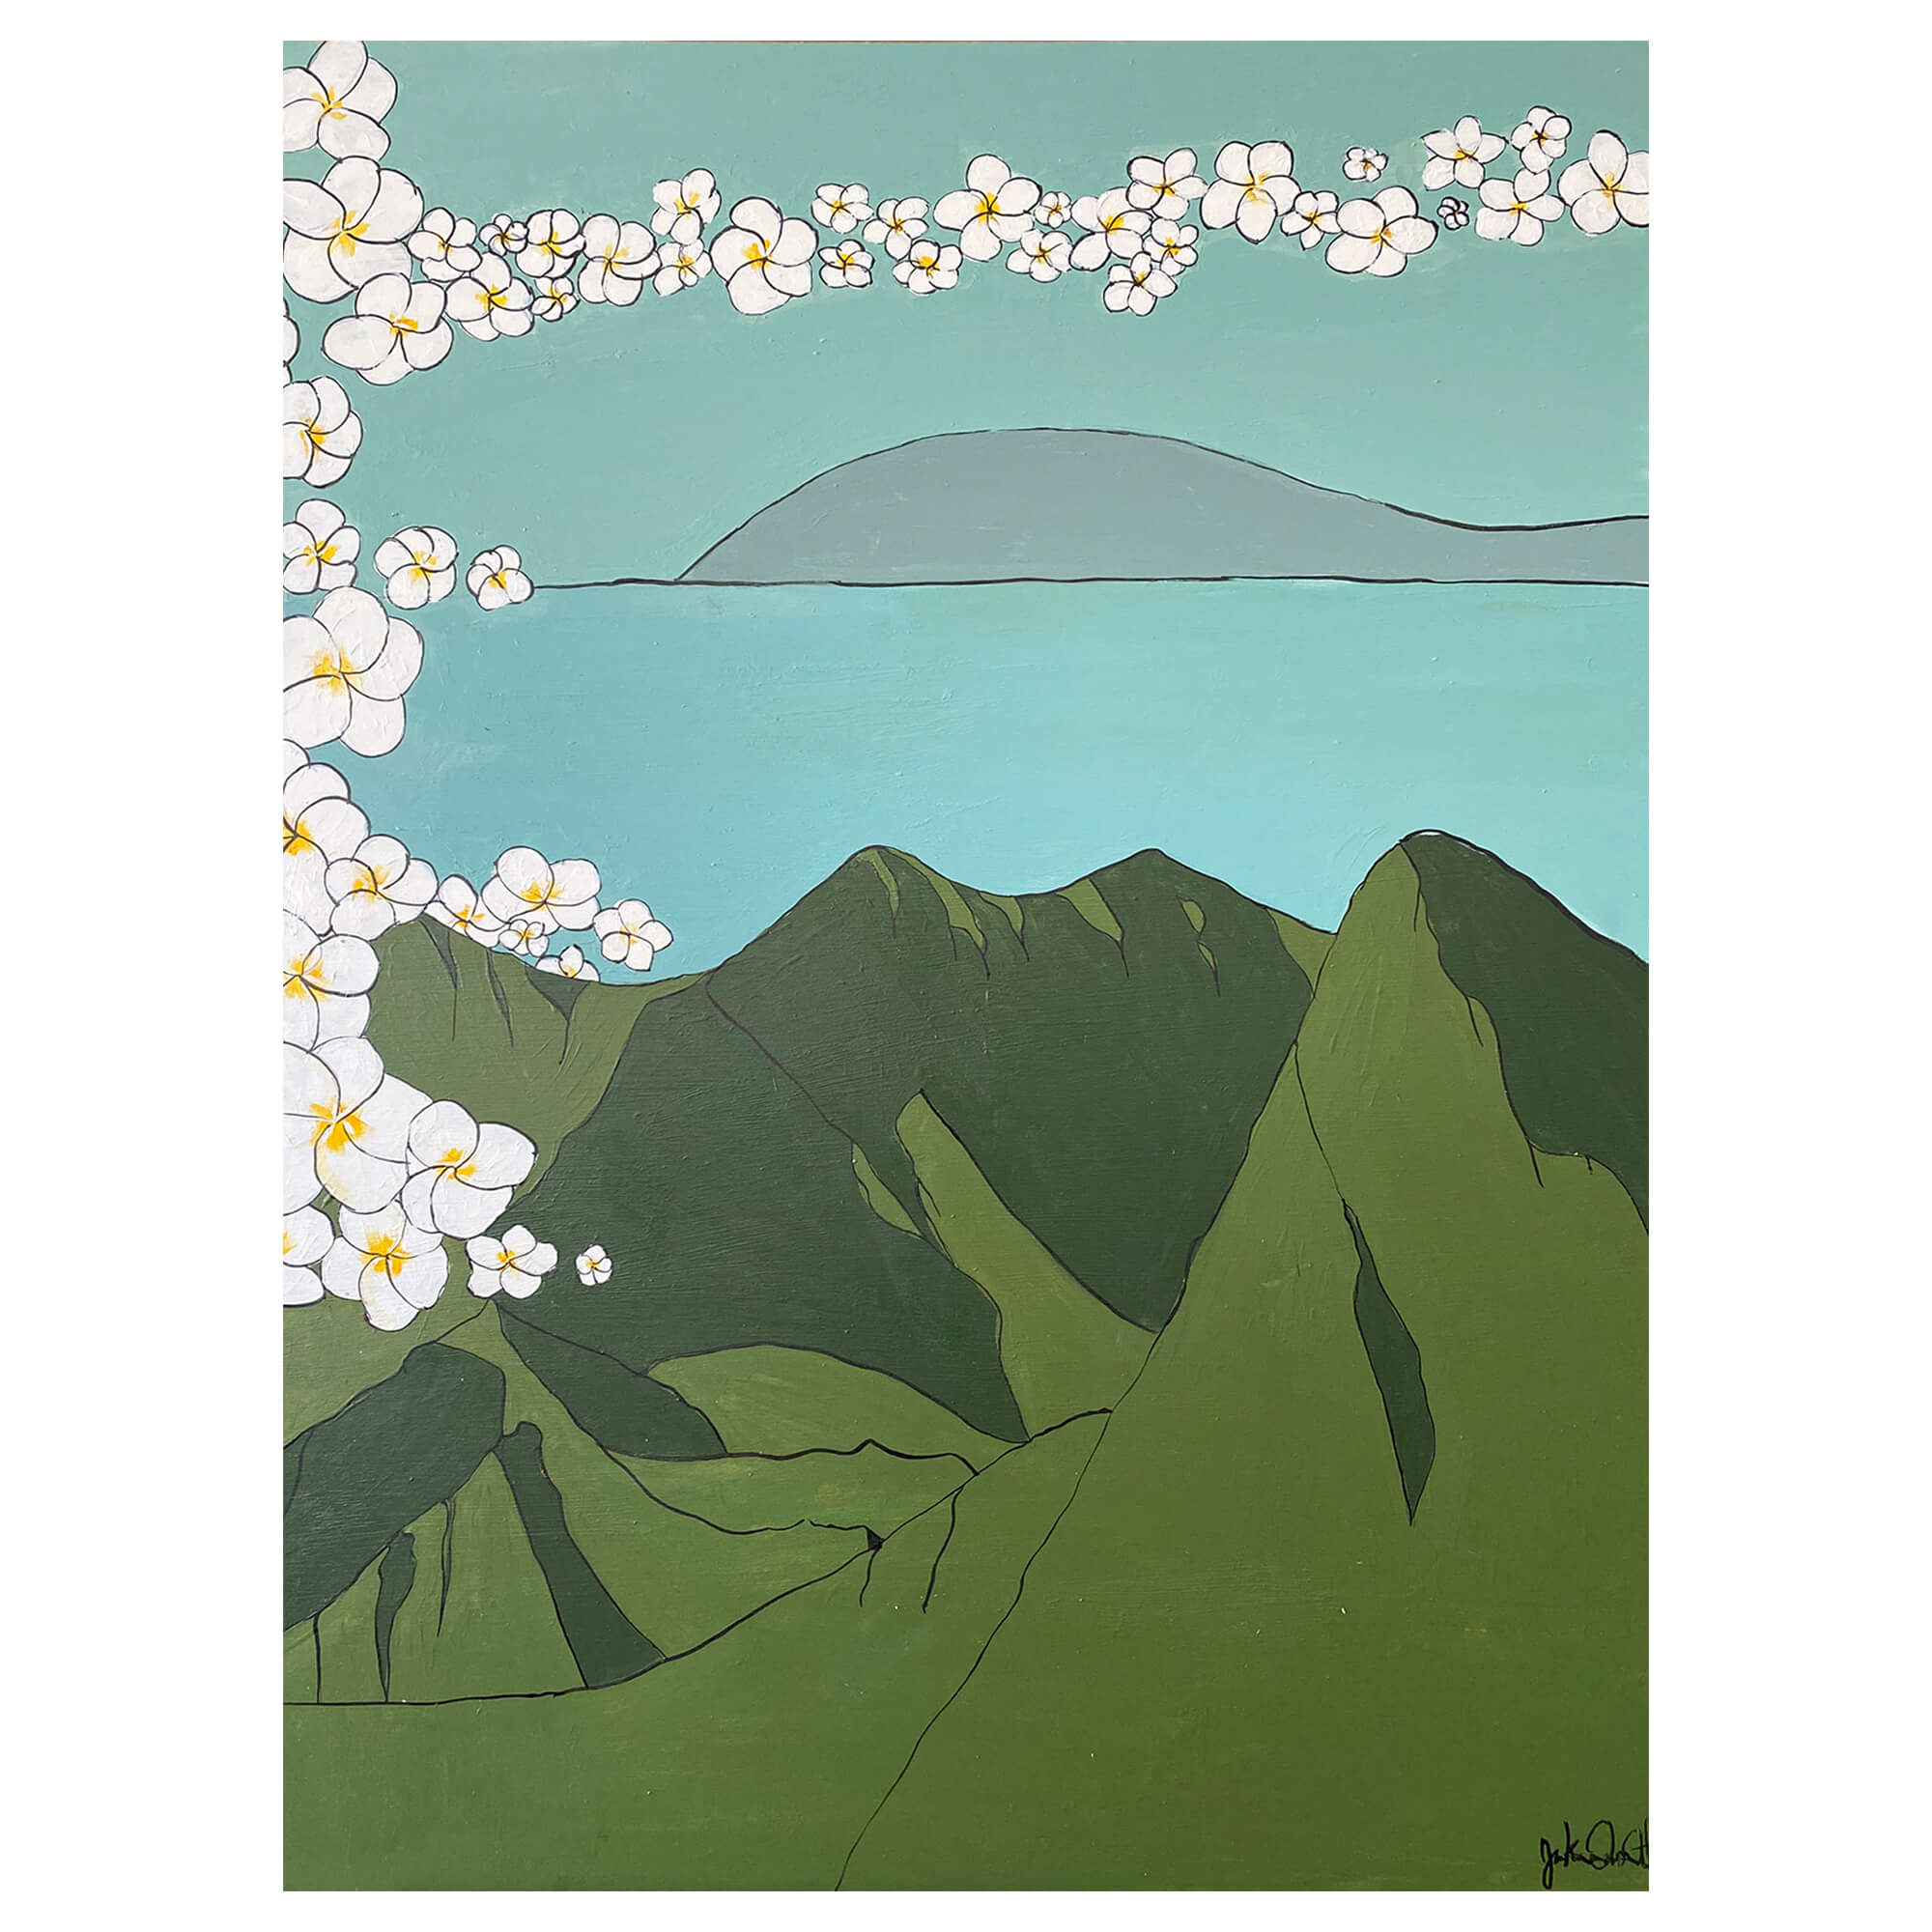 A matted art print featuring the beautiful mountains of Hawaii with plumeria flowers by Hawaii artist Jackie Eitel